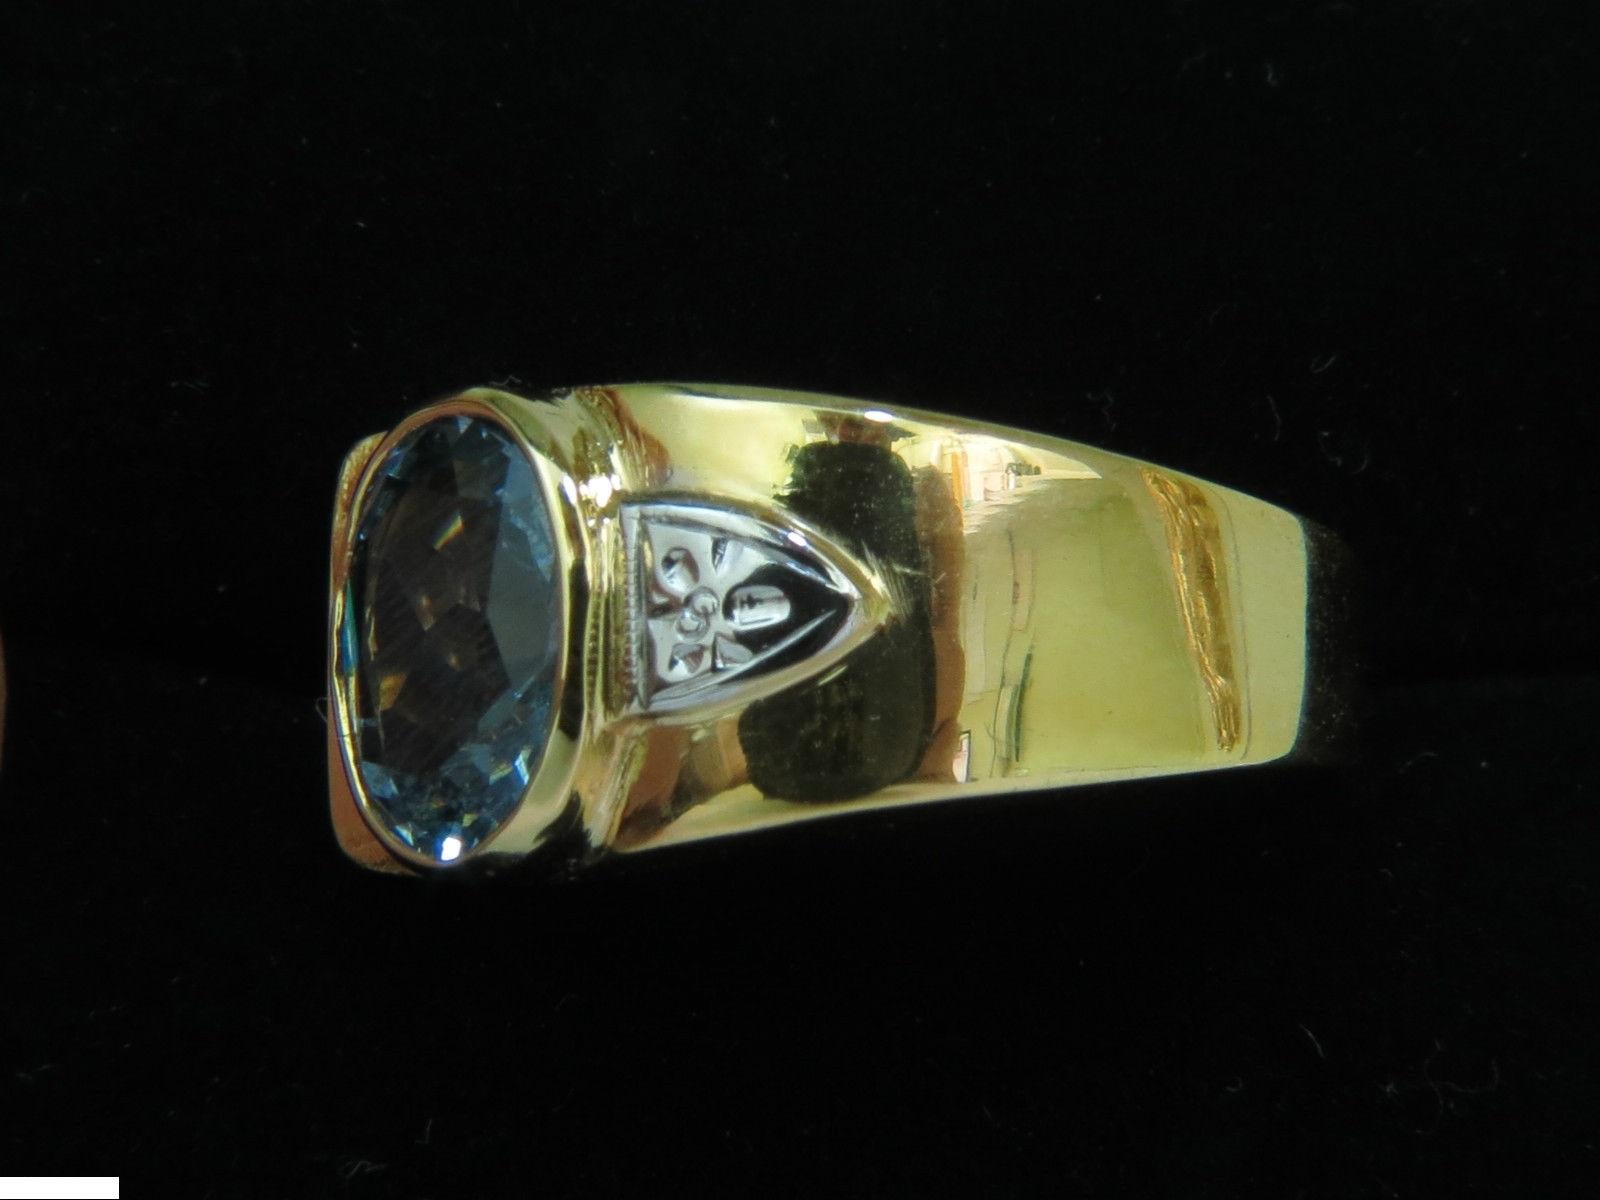 2.00ct Natural Aquamarine
Oval Brilliant

Transparent

Si-2 clarity

(aquamarine has needle lines inclusions)

Classic Aqua blue color

9.5 X 8mm

14kt. yellow gold

6.8 grams

$1500 Appraisal to accompany 

Current size: 9 and can be resized 

Ring